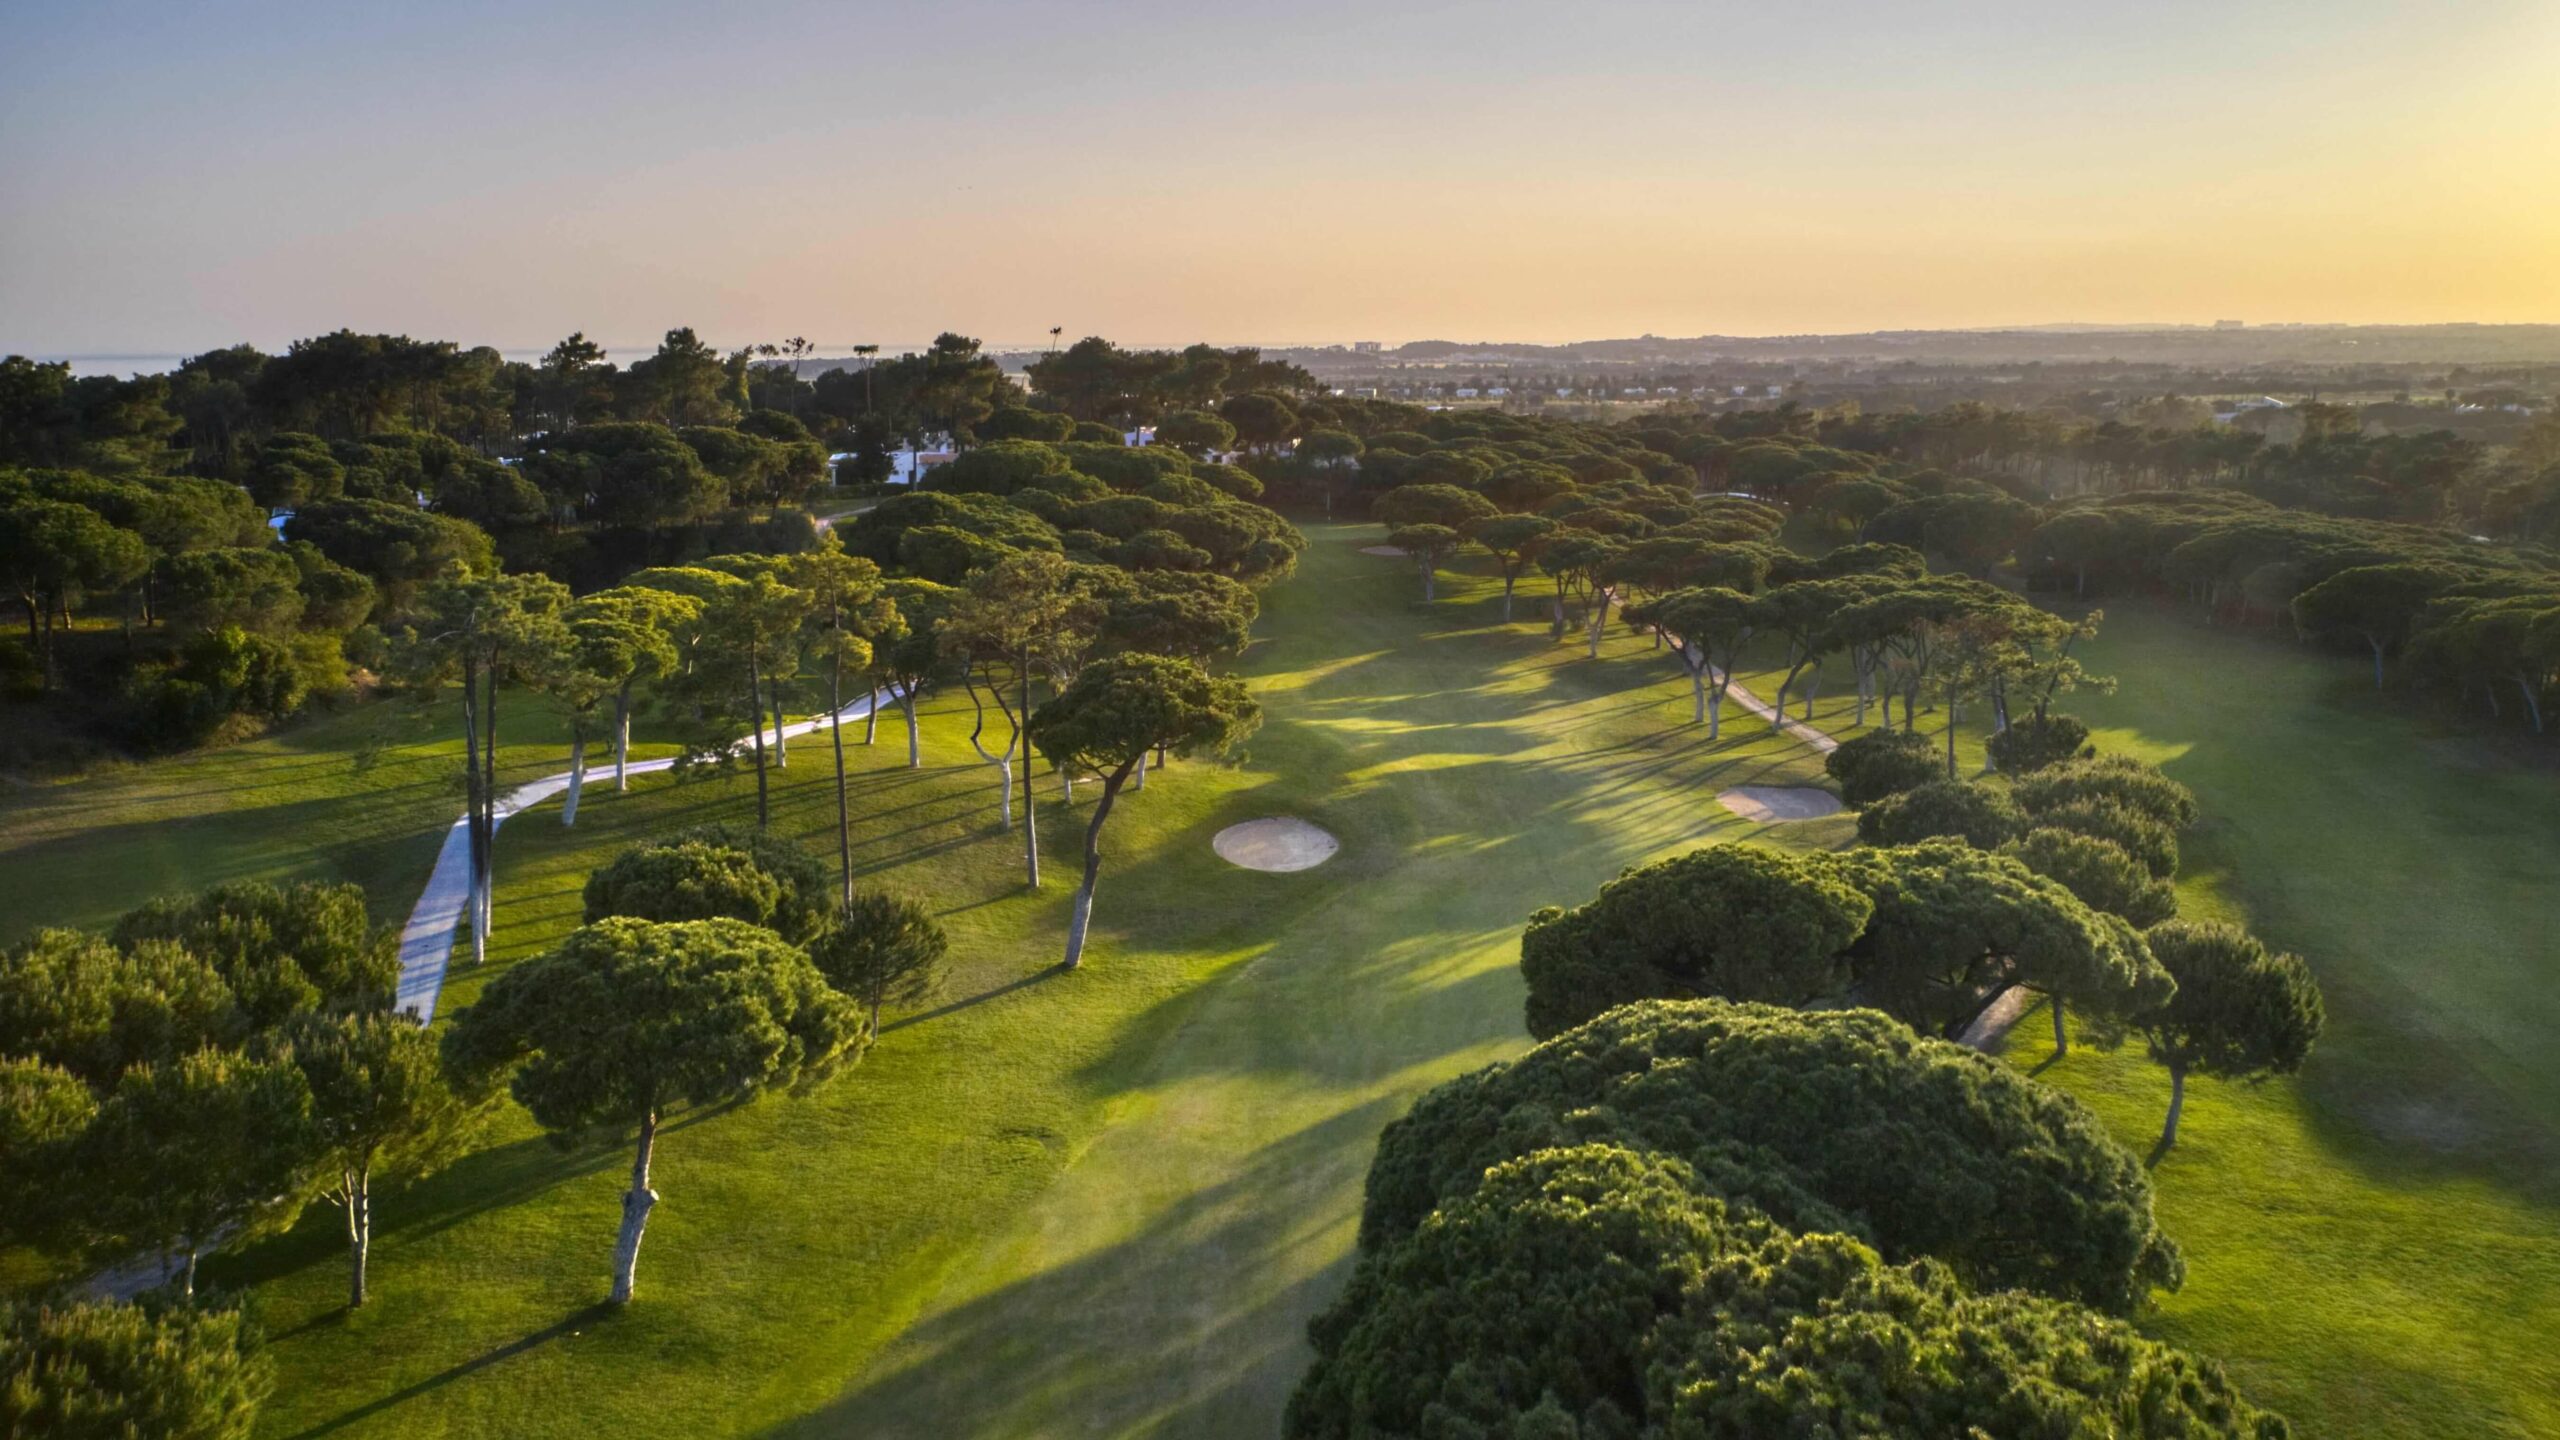 An aerial view of the 11th hole on the Old Course Vilamoura